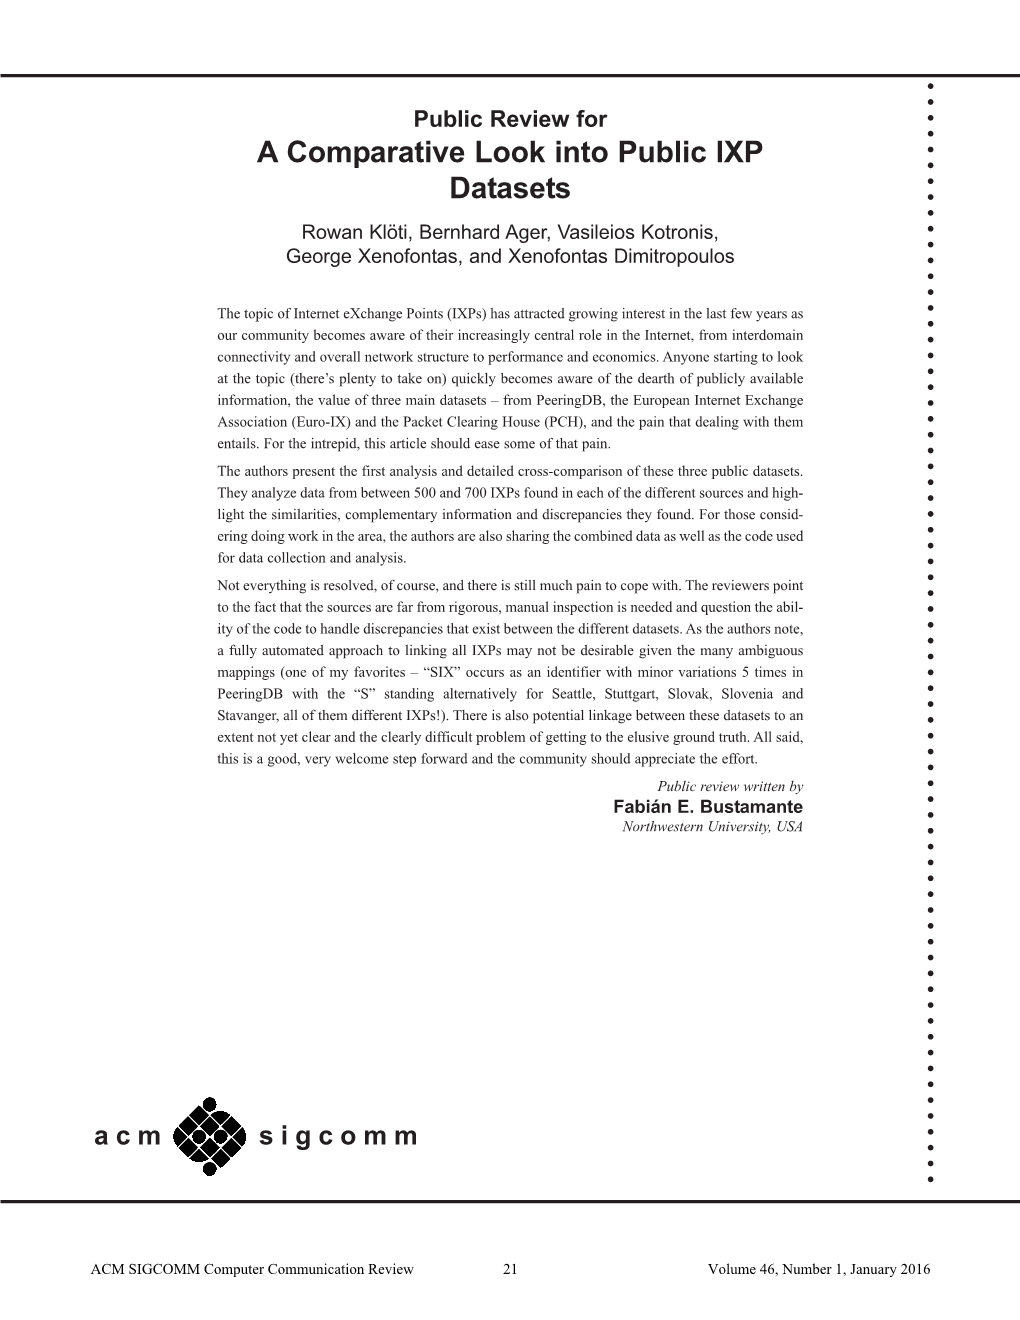 A Comparative Look Into Public IXP Datasets